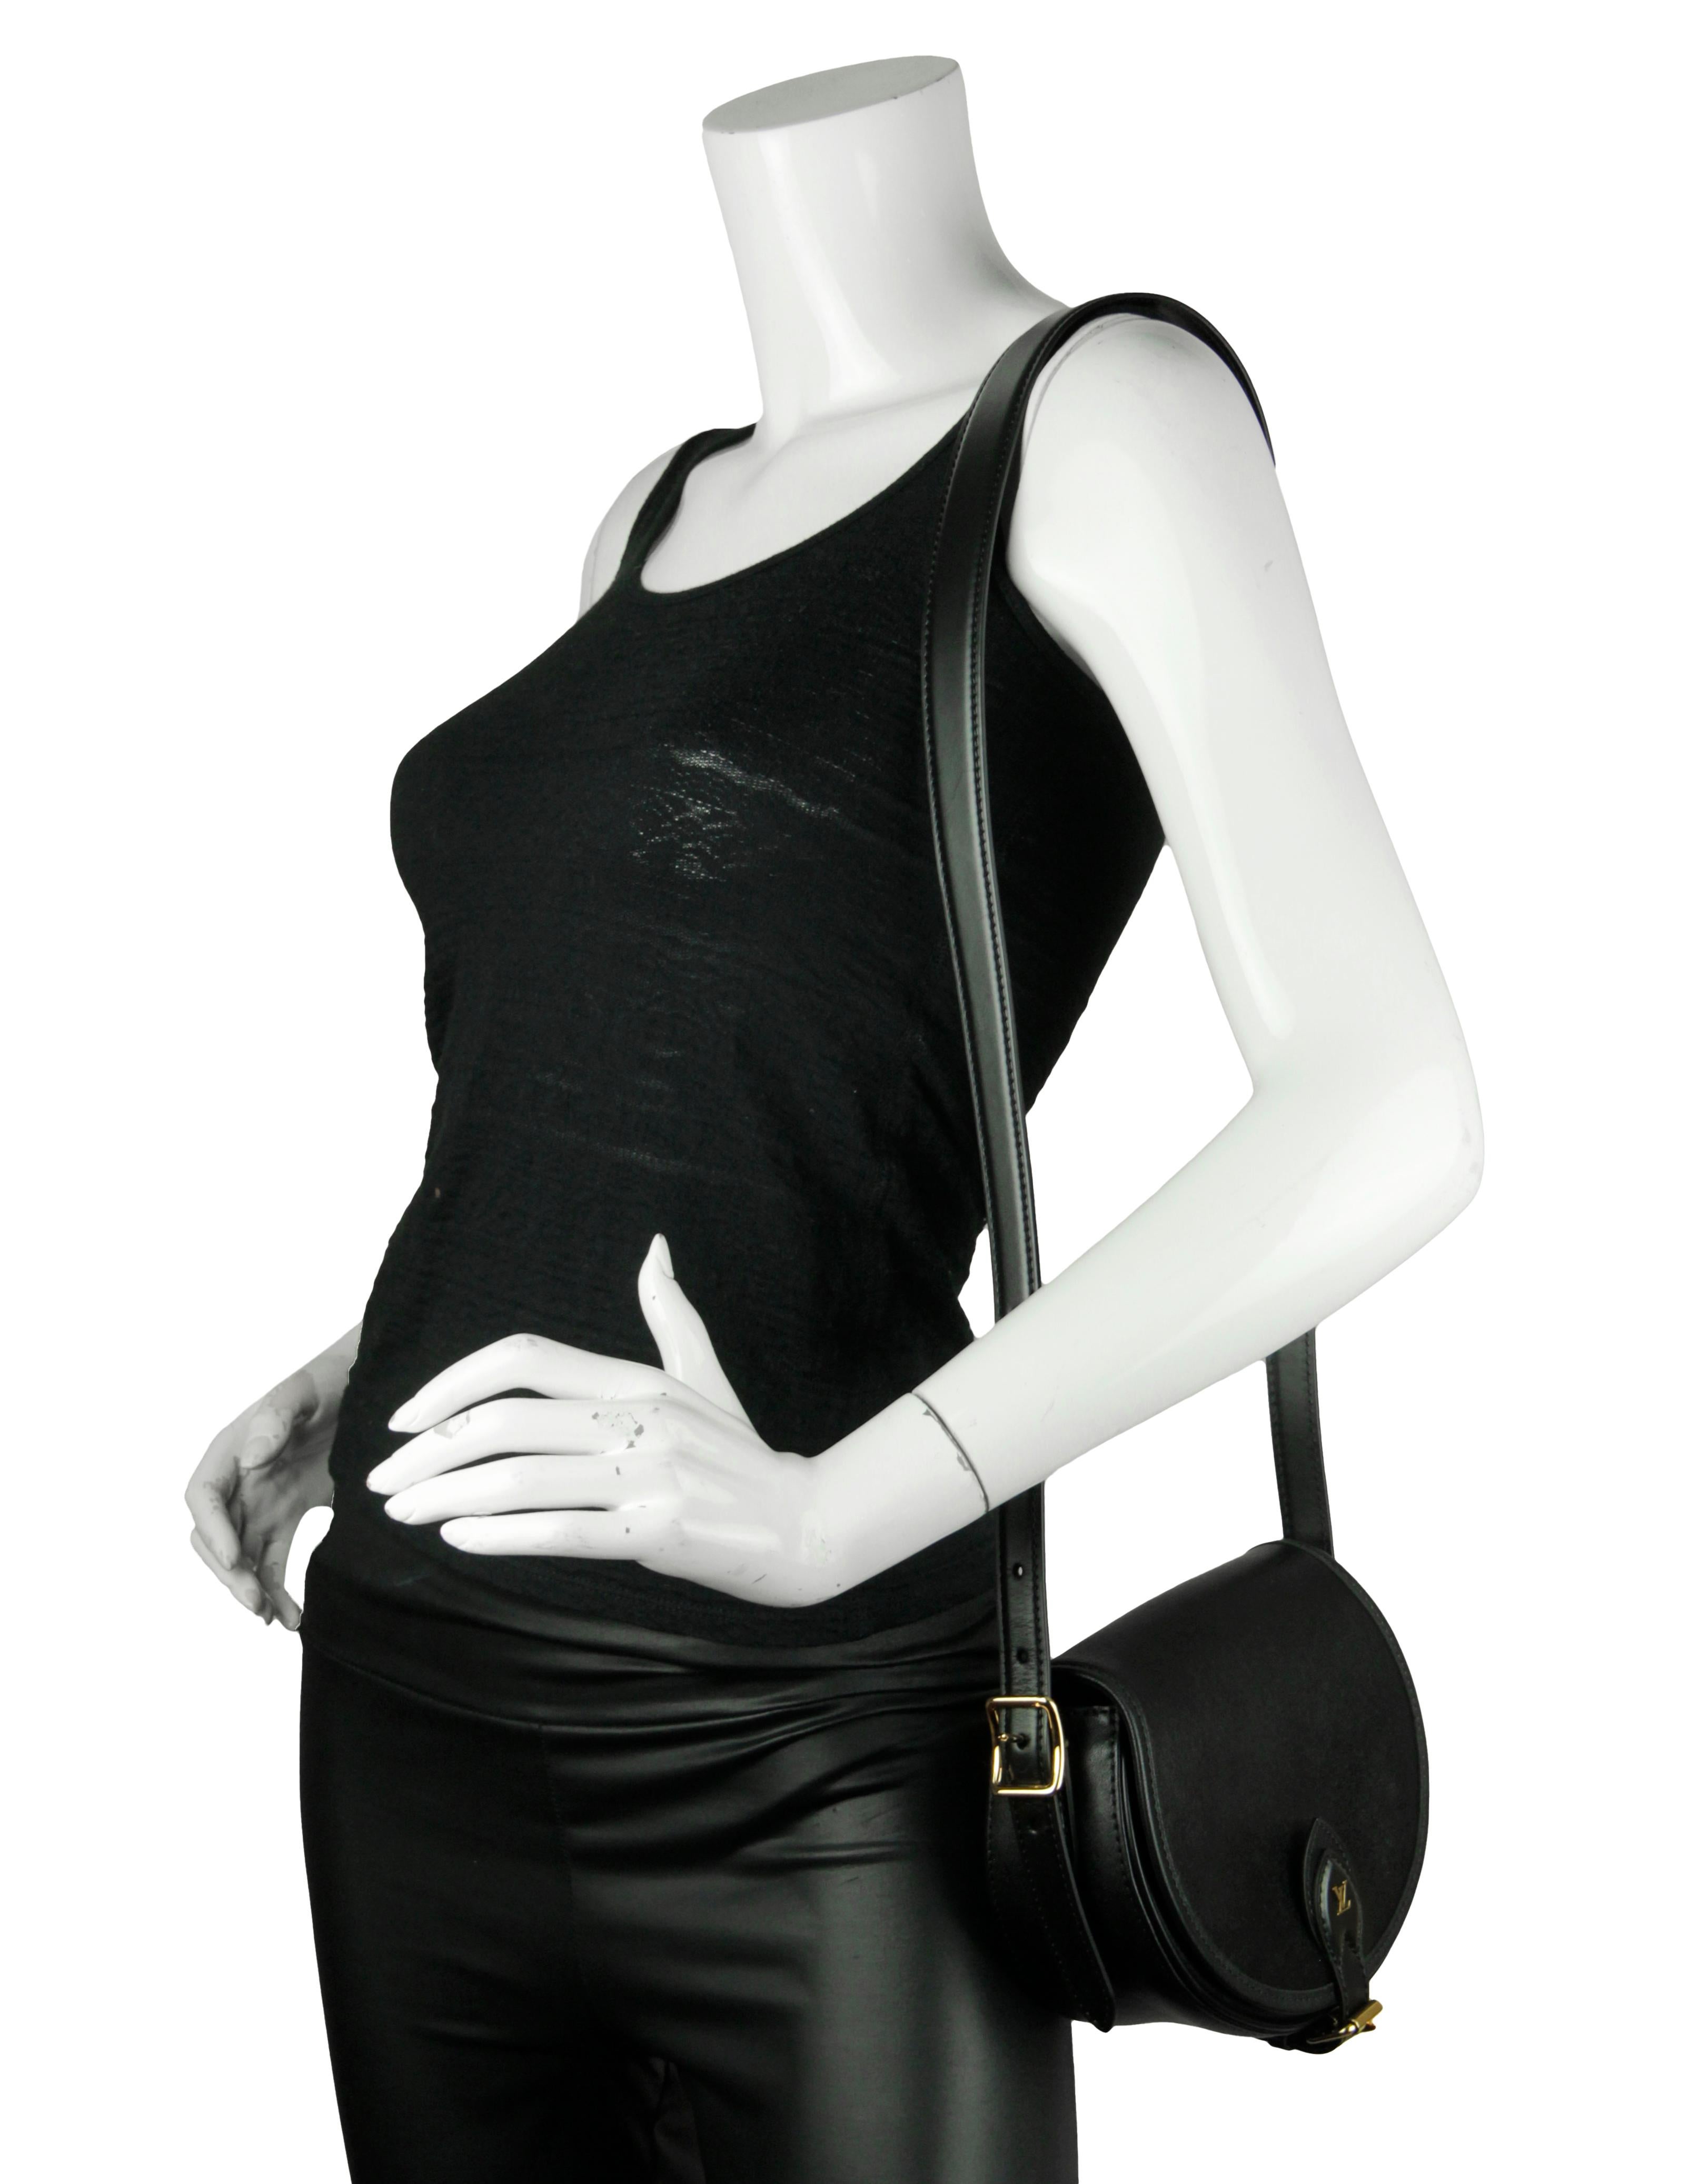 Louis Vuitton Black Leather Tambourin NM Crossbody Bag
Made In: Italy
Color: Black
Hardware: Goldtone
Materials: Smooth leather
Lining: Black microfiber
Closure/Opening: Flap top with buckle
Exterior Pockets: None
Interior Pockets: One flat
Exterior